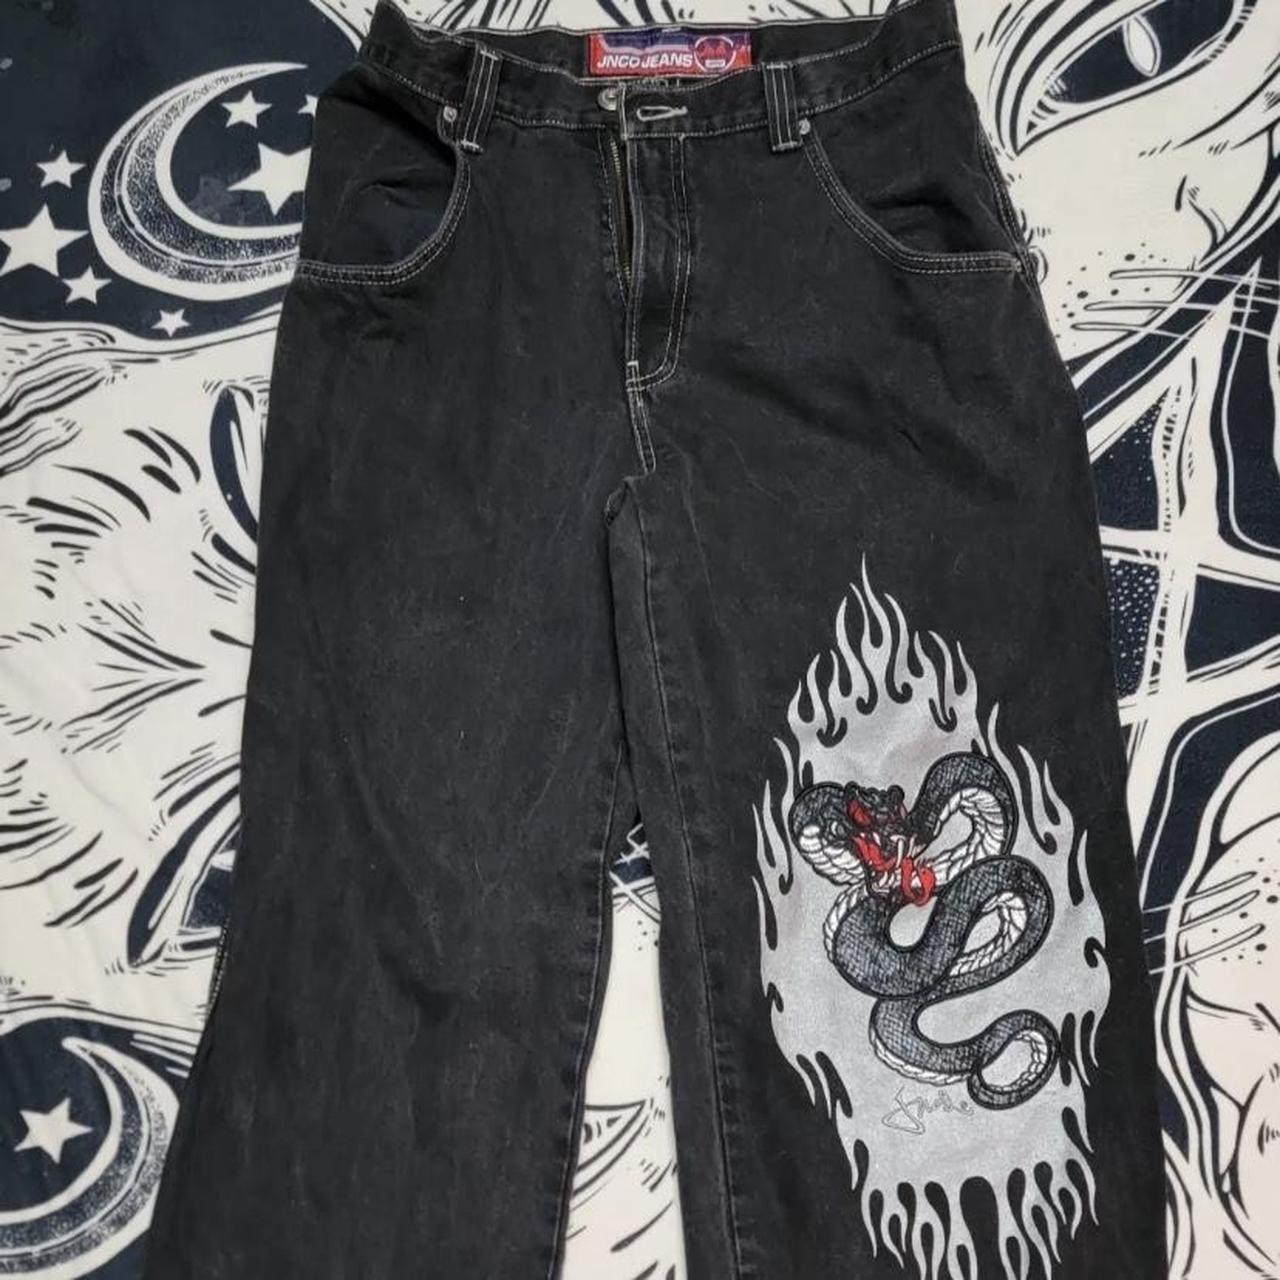 Jnco tribal snake print jeans, tagged 32/32, baggy... - Depop